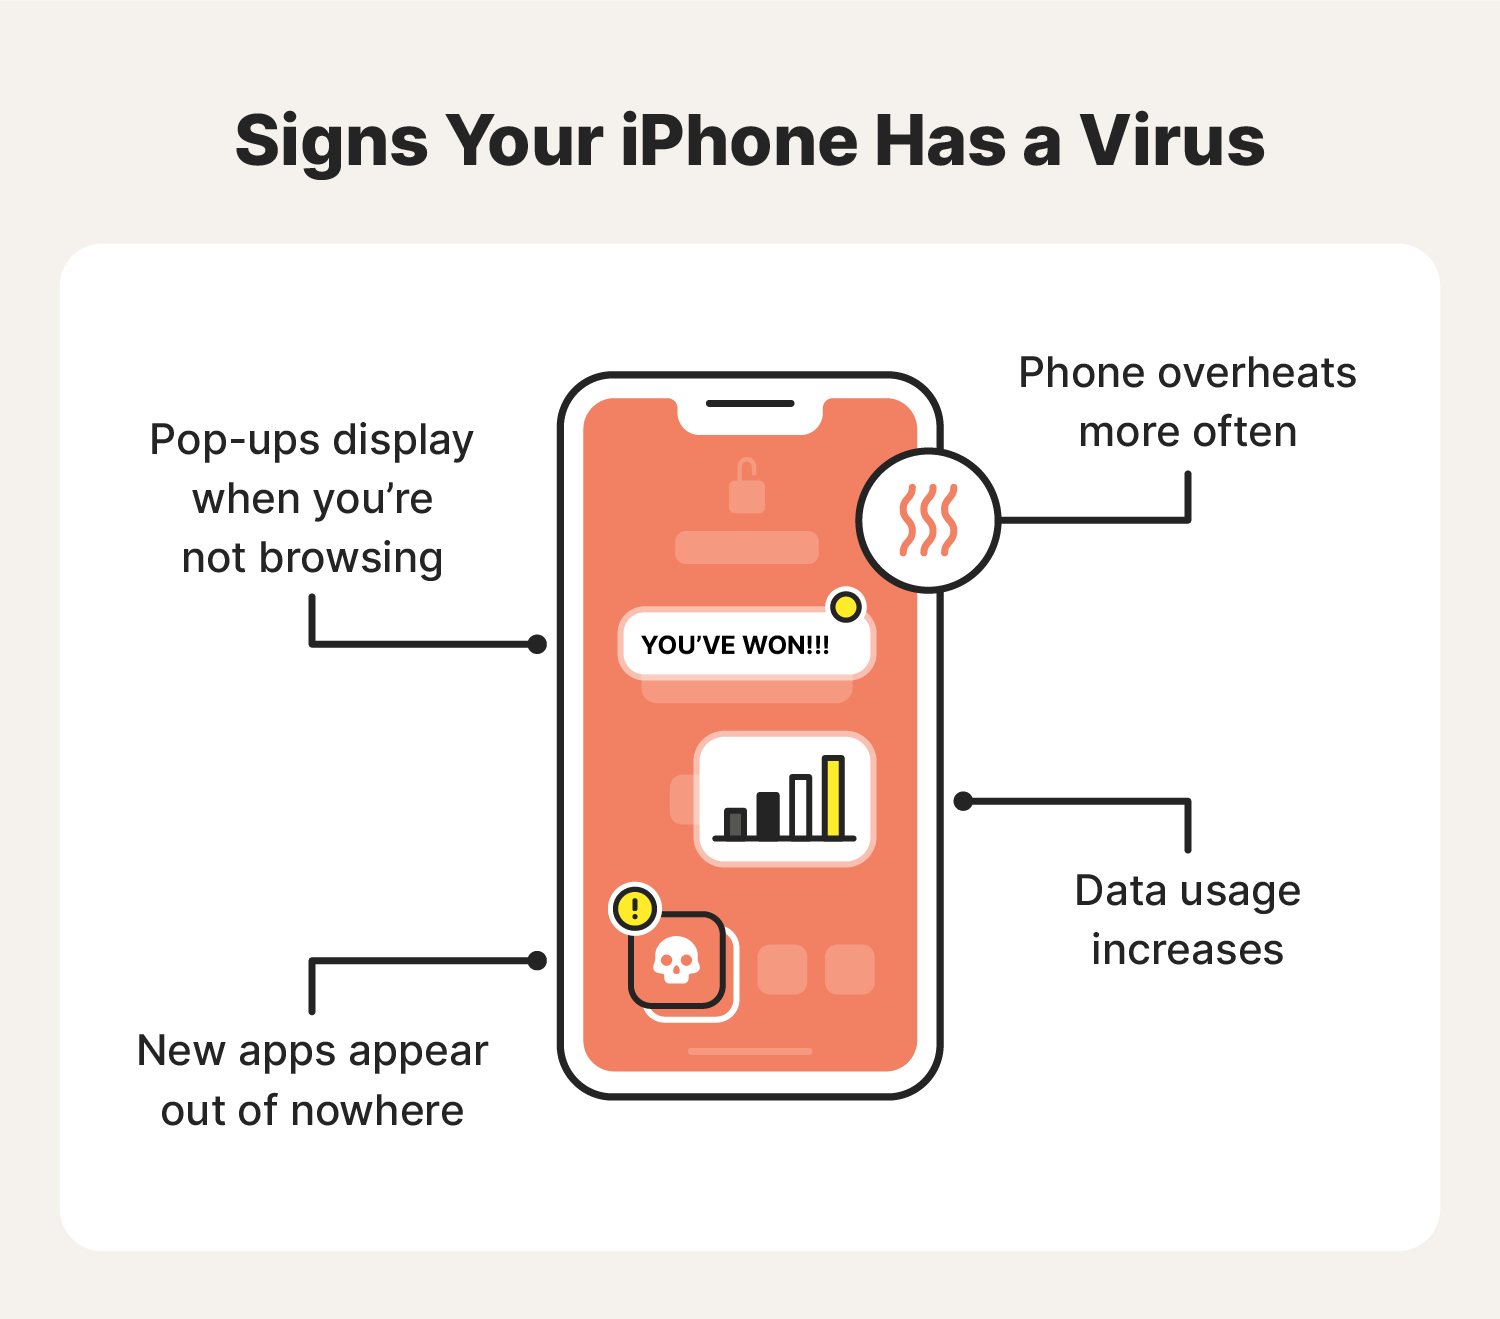 An image covers signs an iPhone has a virus.